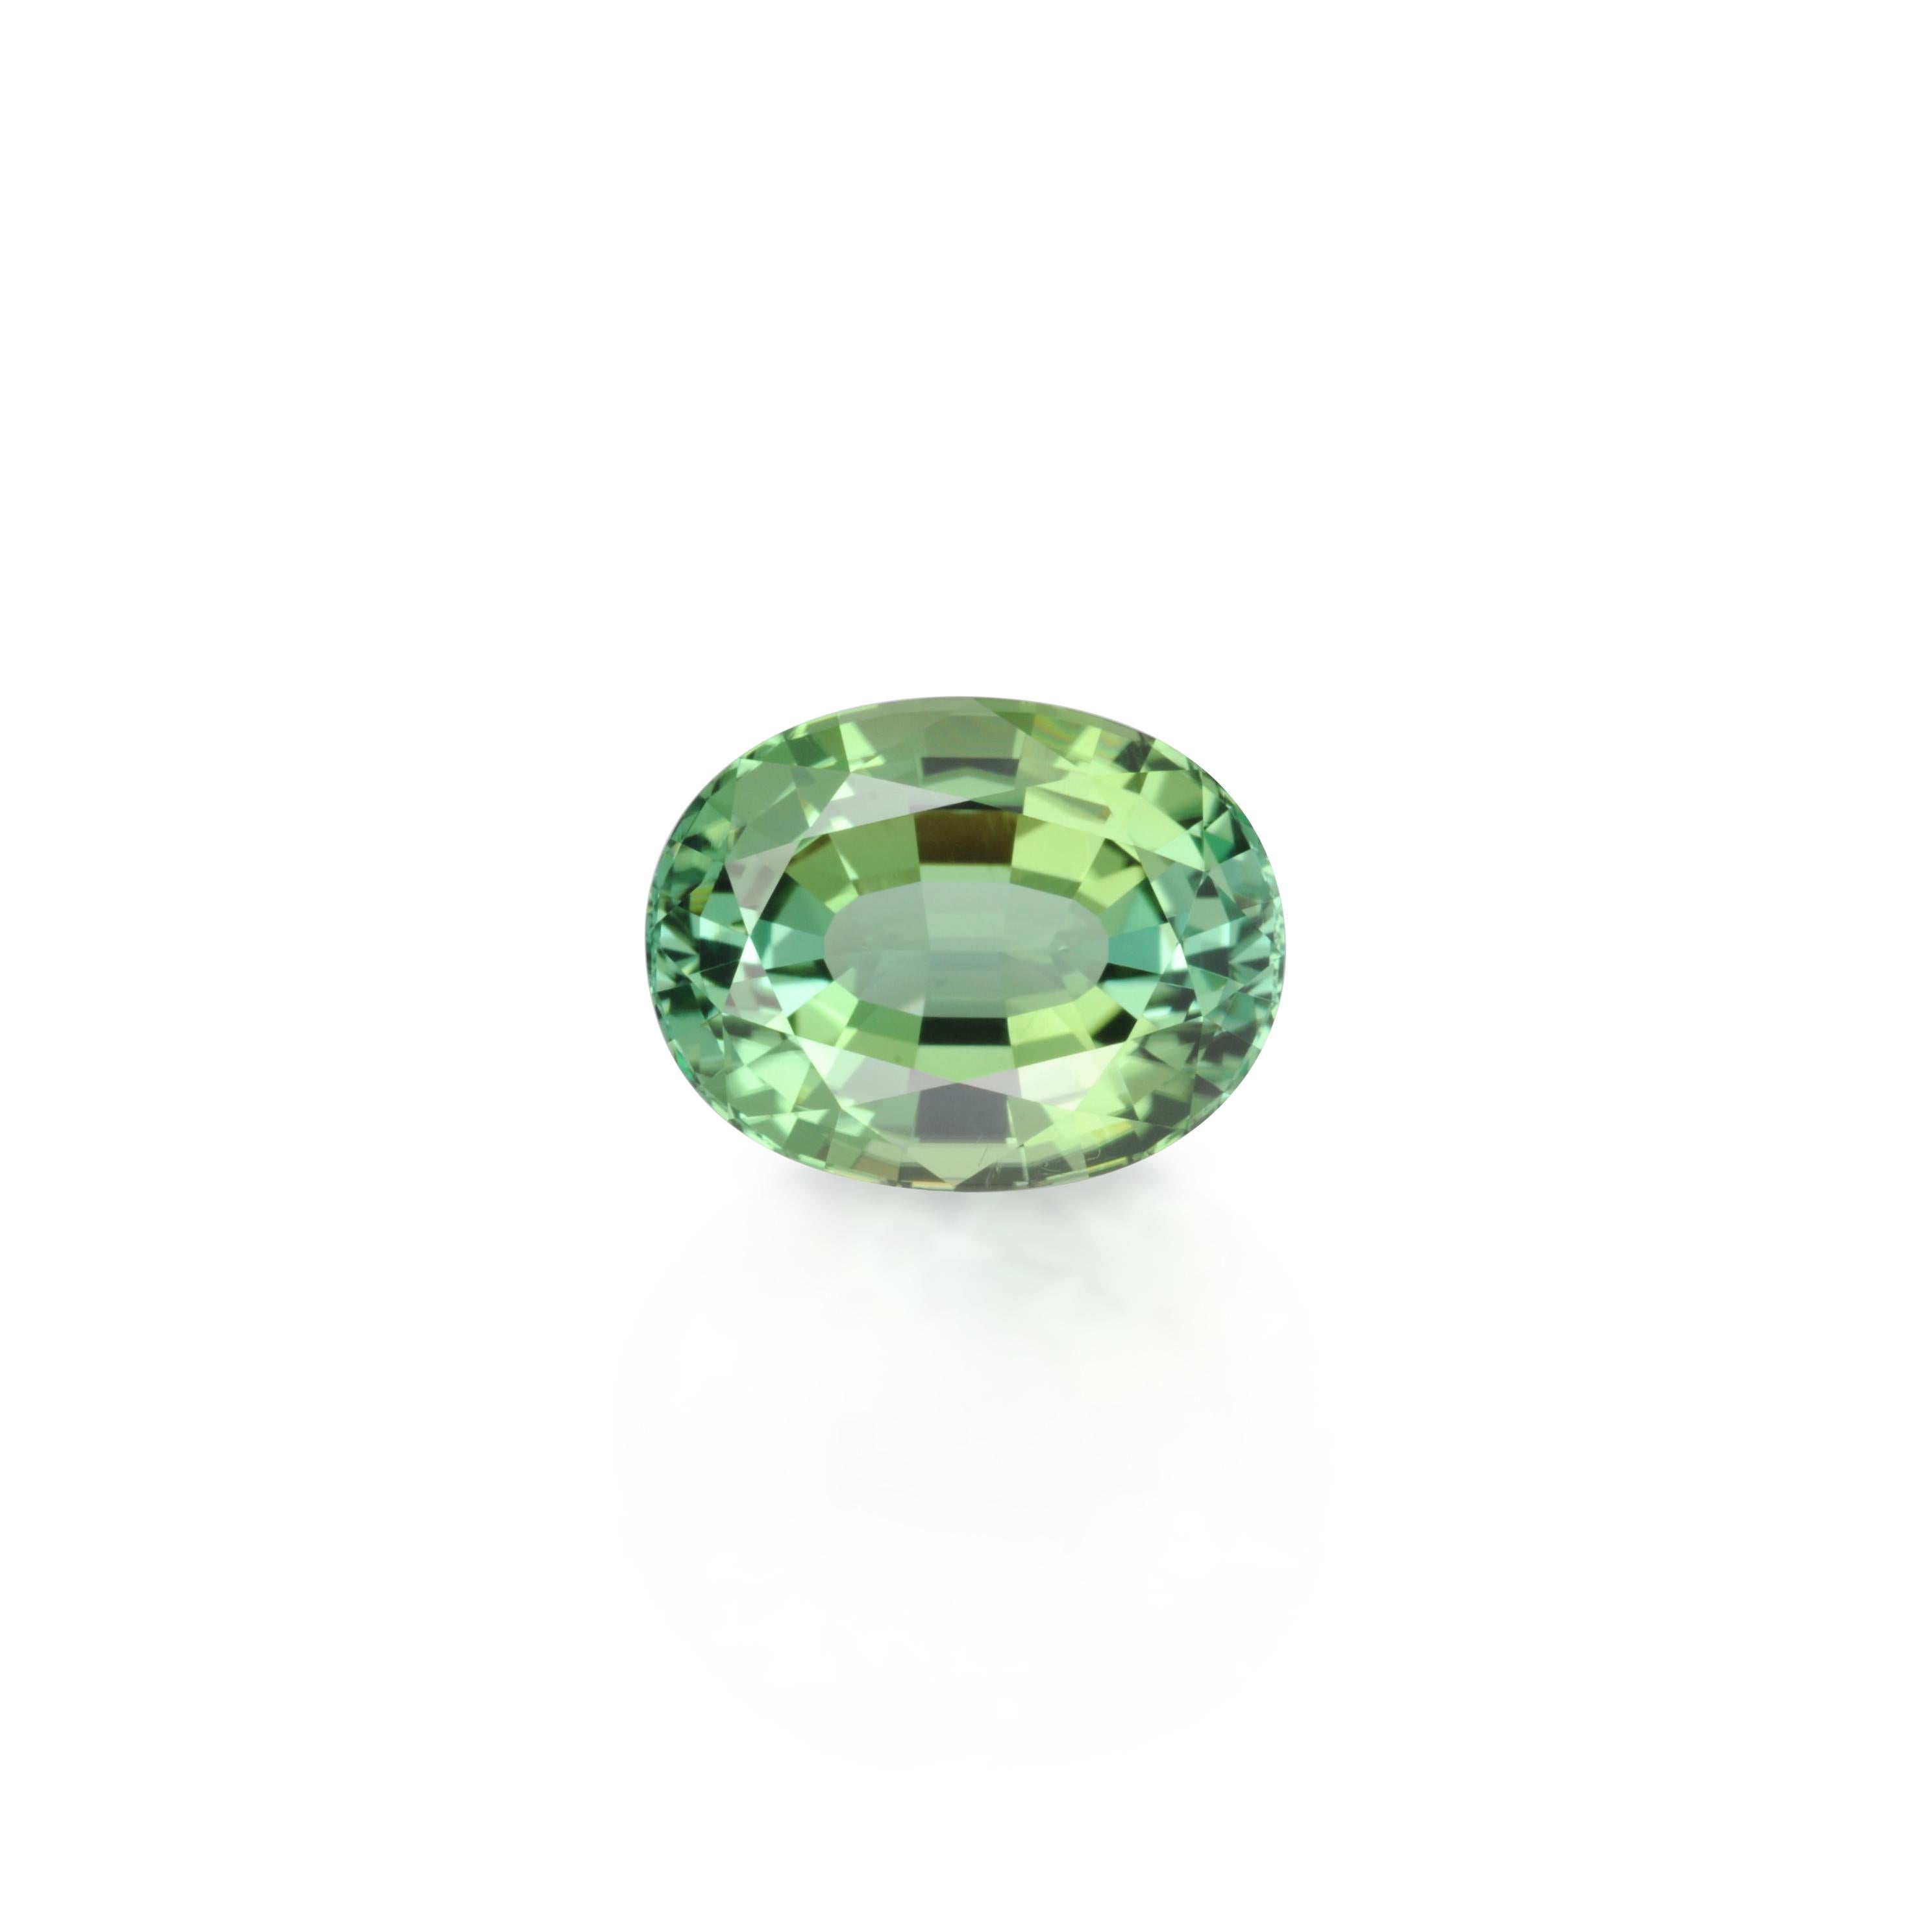 Marvelous 13.82 carat Mint Green Tourmaline oval gem, offered loose to someone special.
Dimensions: 16.90 x 13.00 x 9.20 mm.
Returns are accepted and paid by us within 7 days of delivery.
We offer supreme custom jewelry work upon request. Please